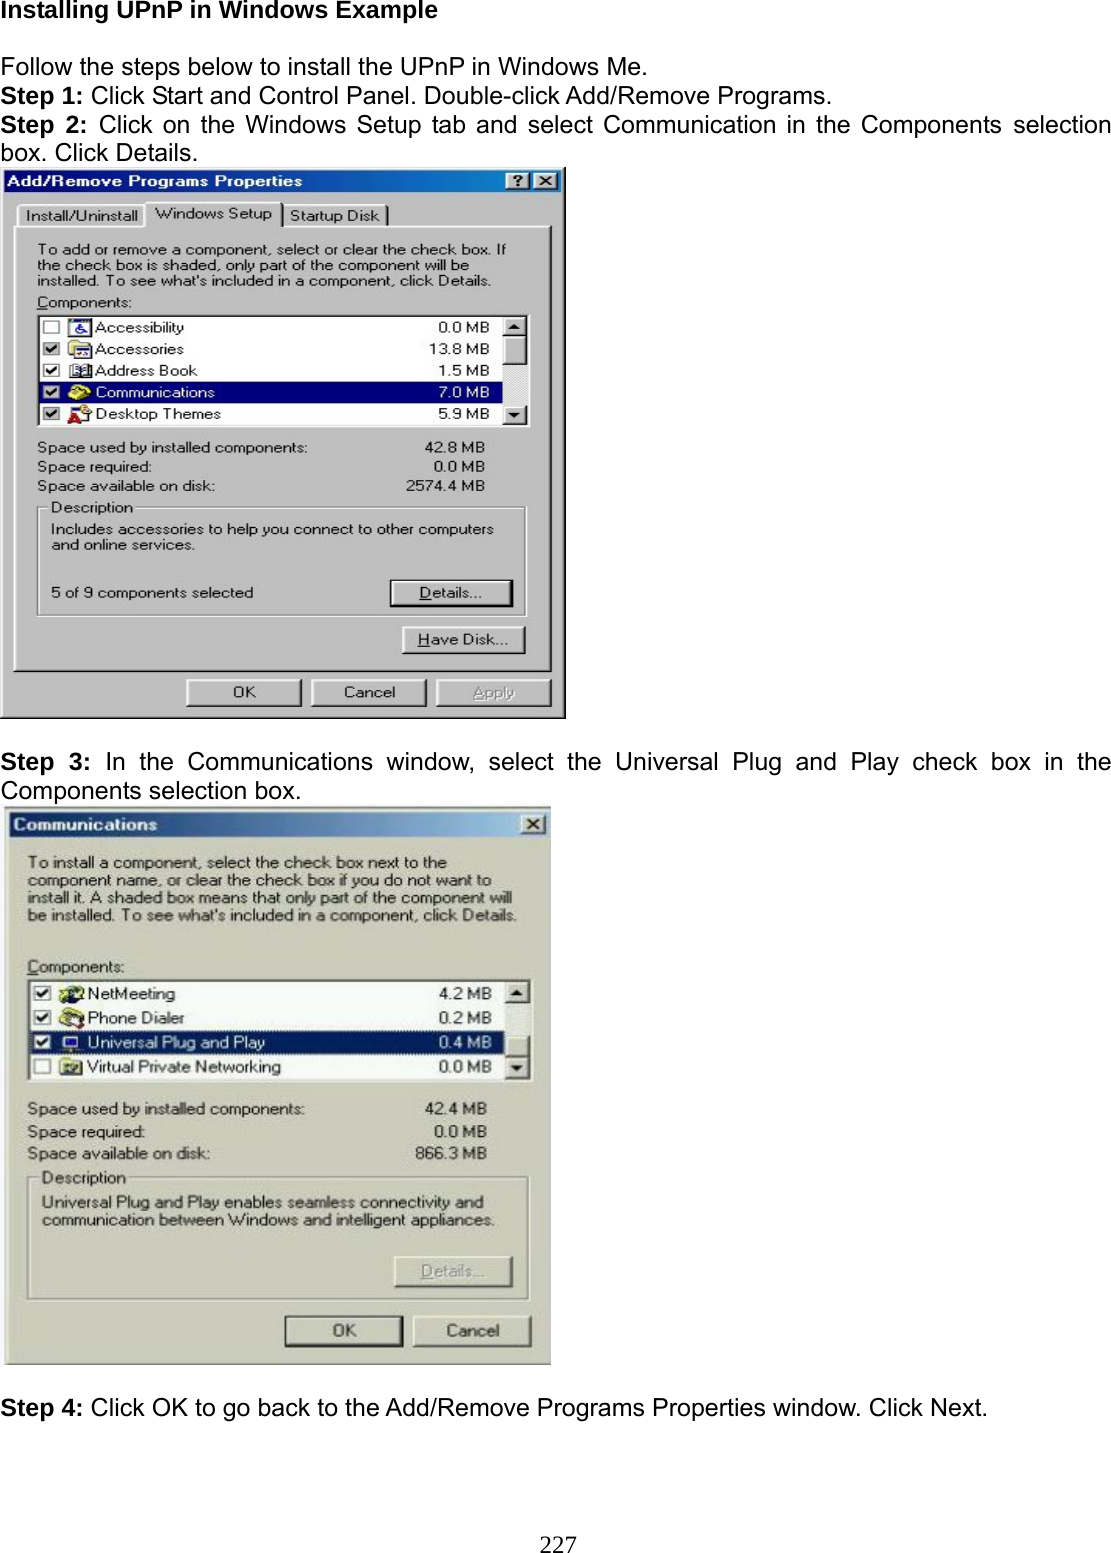 227 Installing UPnP in Windows Example  Follow the steps below to install the UPnP in Windows Me. Step 1: Click Start and Control Panel. Double-click Add/Remove Programs. Step 2: Click on the Windows Setup tab and select Communication in the Components selection box. Click Details.   Step 3: In the Communications window, select the Universal Plug and Play check box in the Components selection box.    Step 4: Click OK to go back to the Add/Remove Programs Properties window. Click Next. 